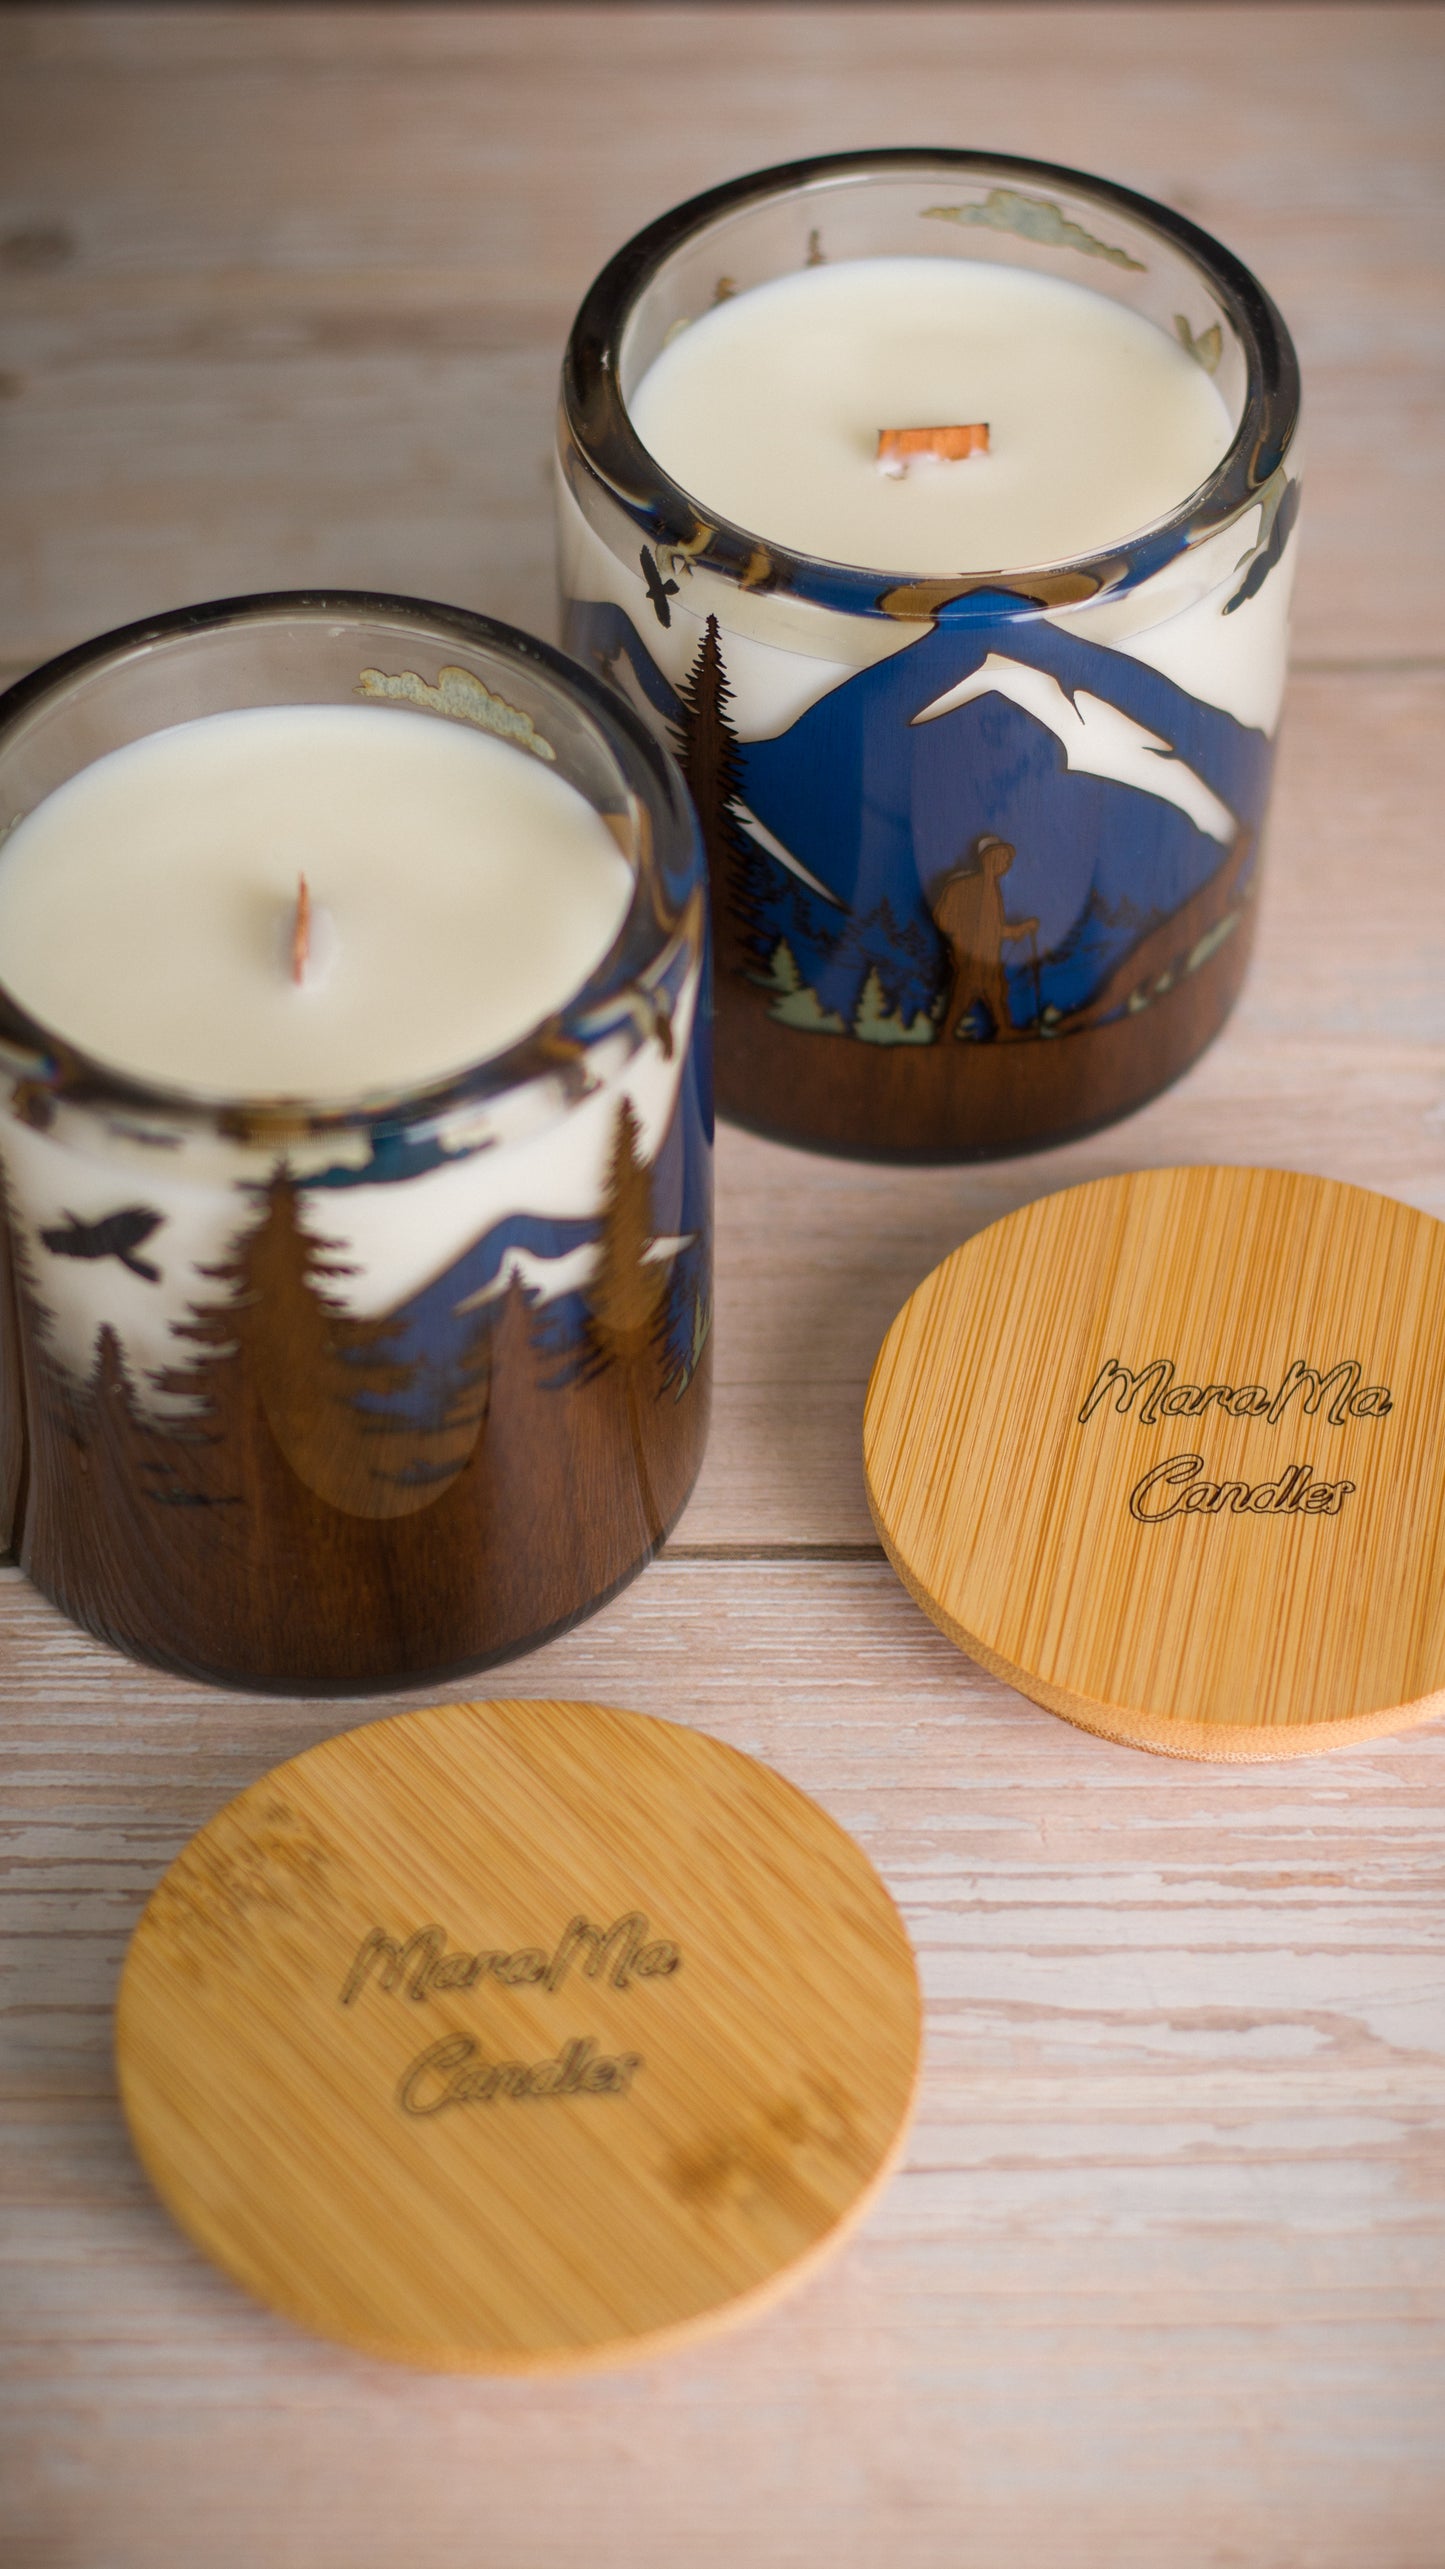 Candle in Handmade Candlestick "Hiking with Doggy"